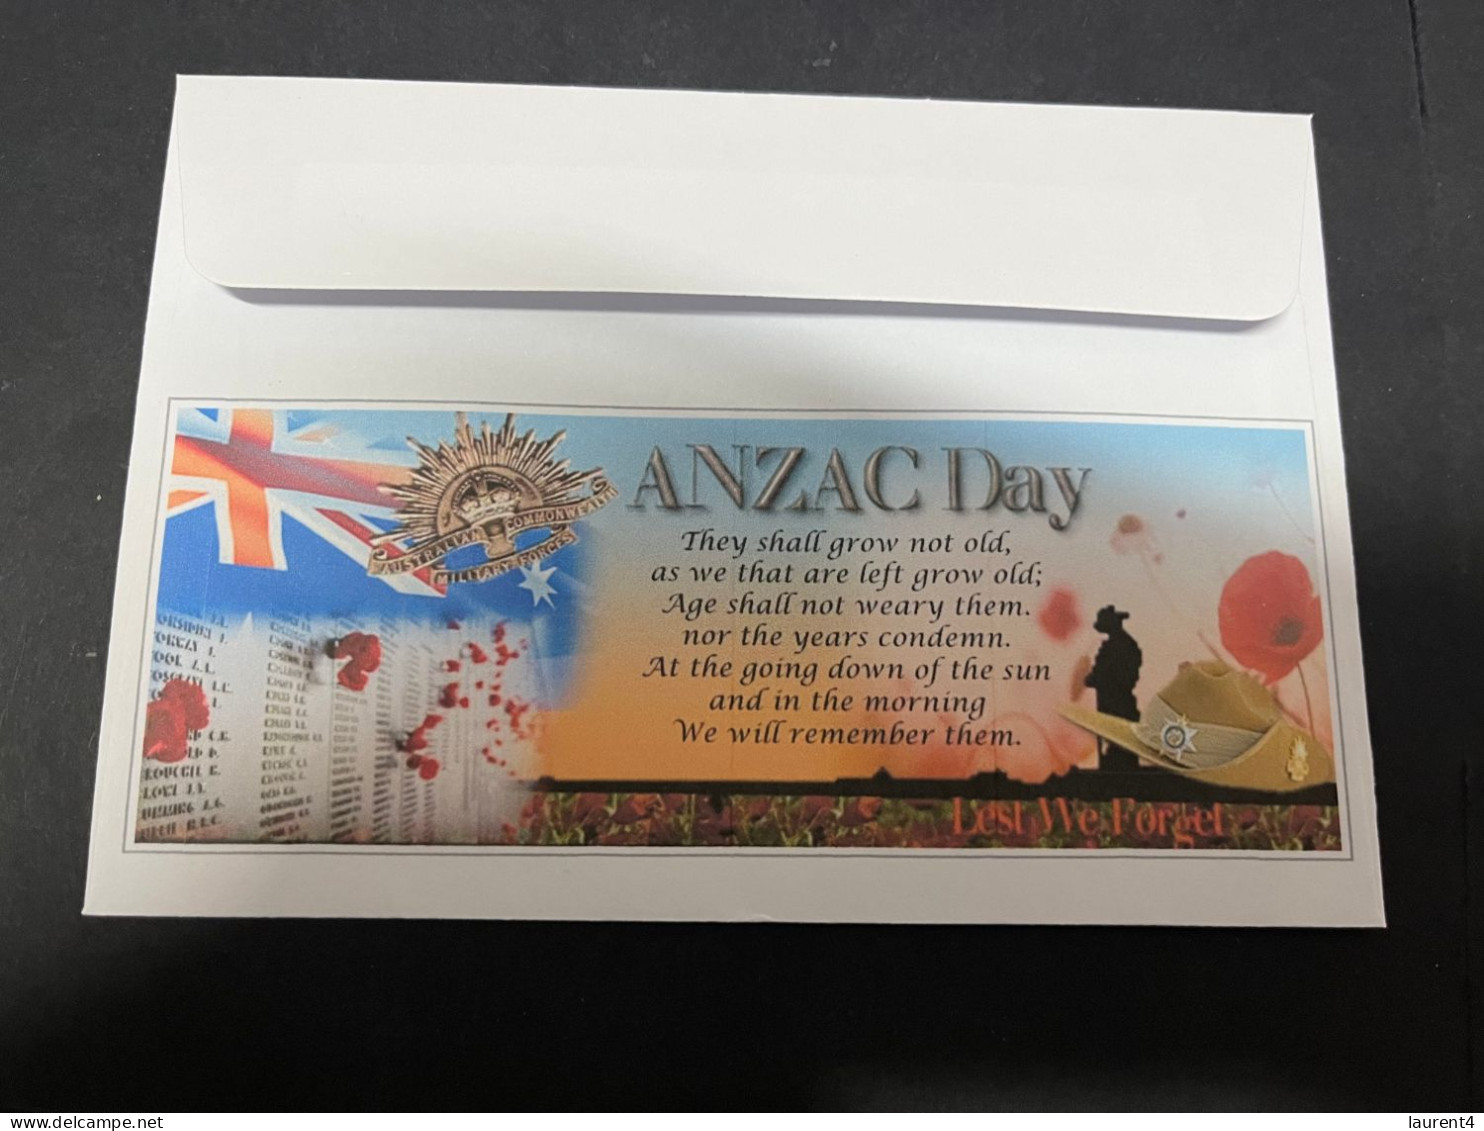 24-4-2024 (2 Z 52) Australia ANZAC 2024 - Special Cover Postmarked 25 April 2024 (War Memorial / Air Force) - Militares